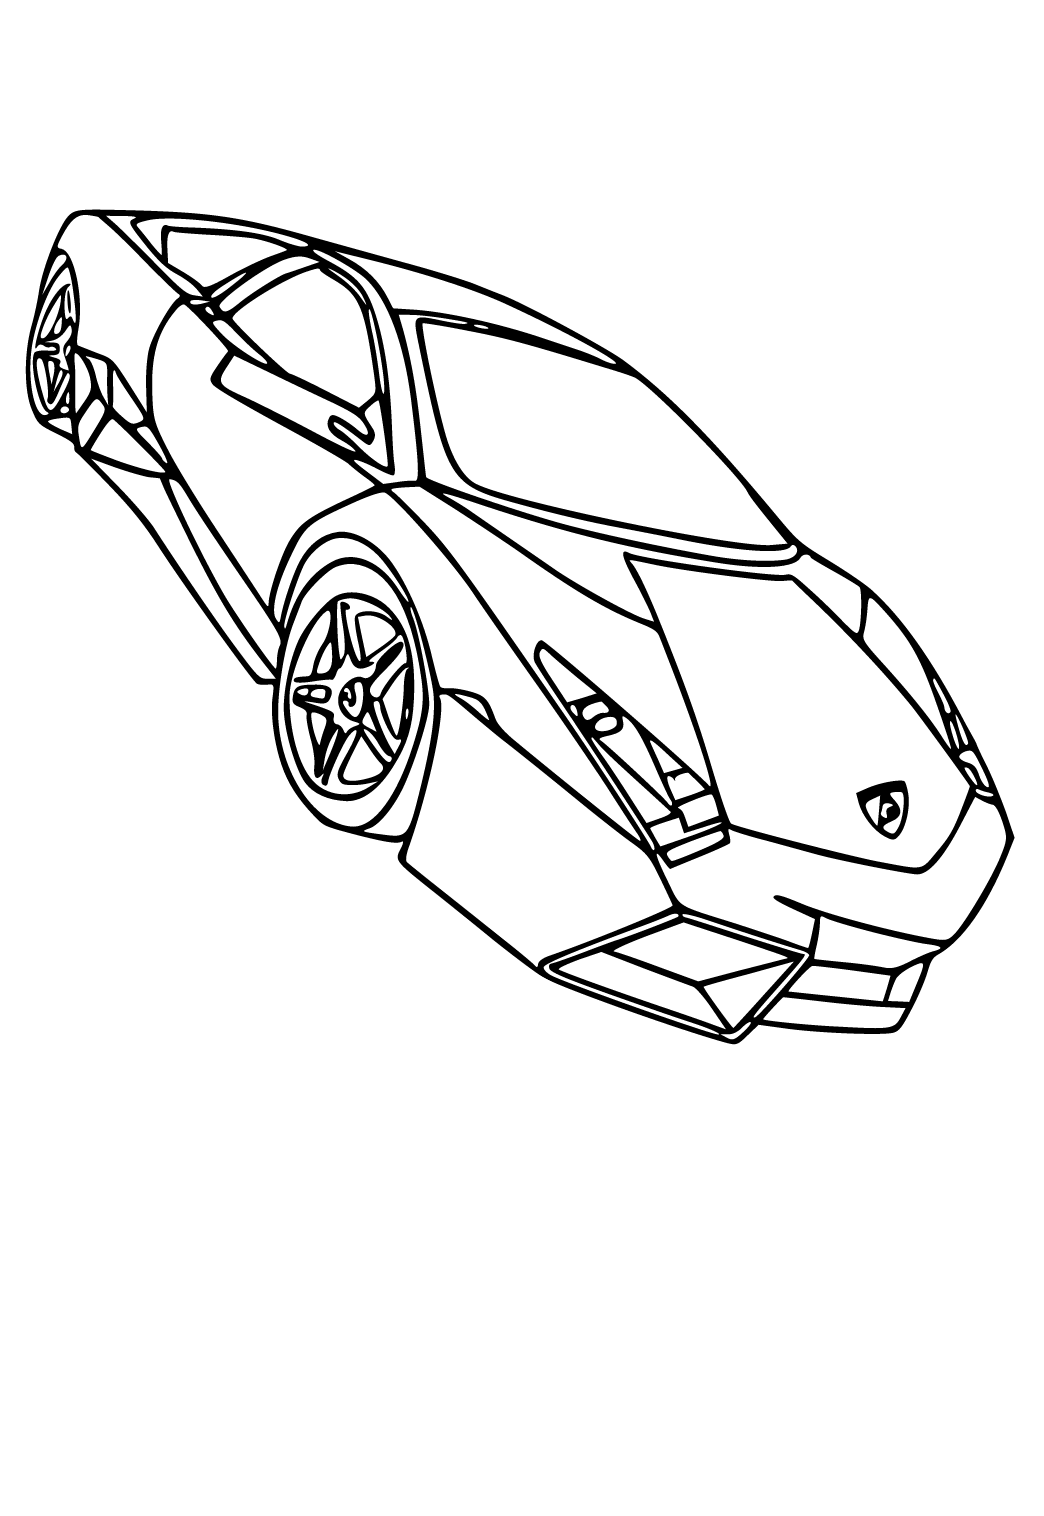 Free printable lamborghini easy coloring page for adults and kids